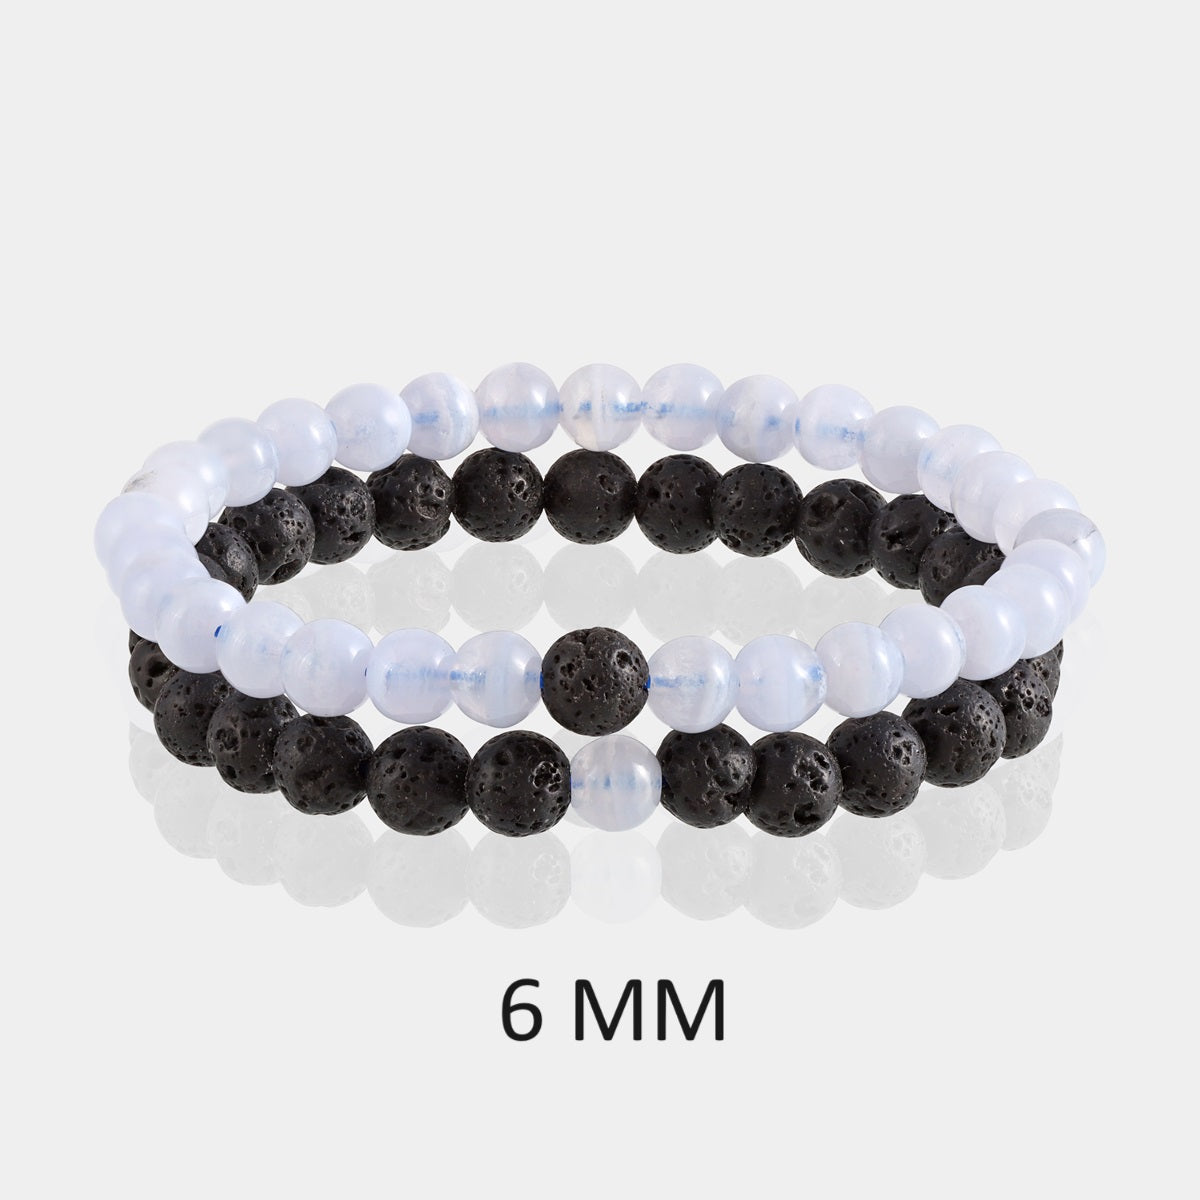 Stylish Blue Lace Agate and Lava Gemstone Bracelet Combo featuring 6mm beads, a harmonious fusion of elegance, communication, and grounding energy on the wrist